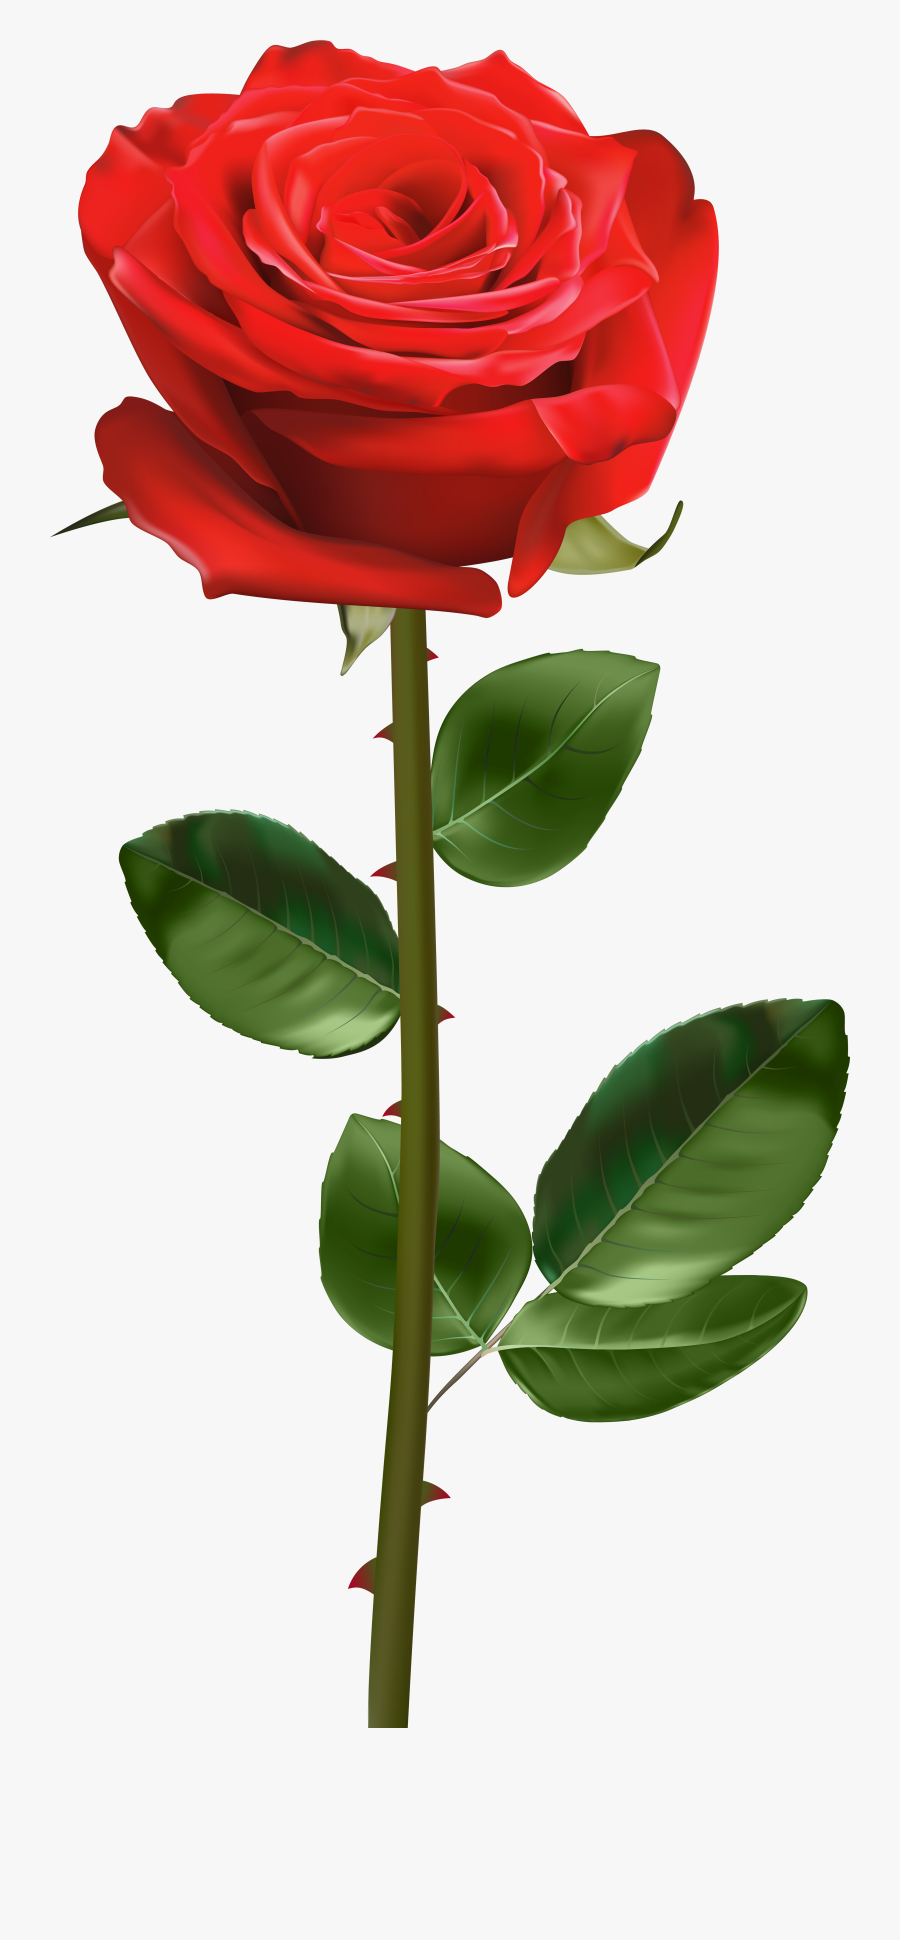 Blue Rose With Thorns, Transparent Clipart